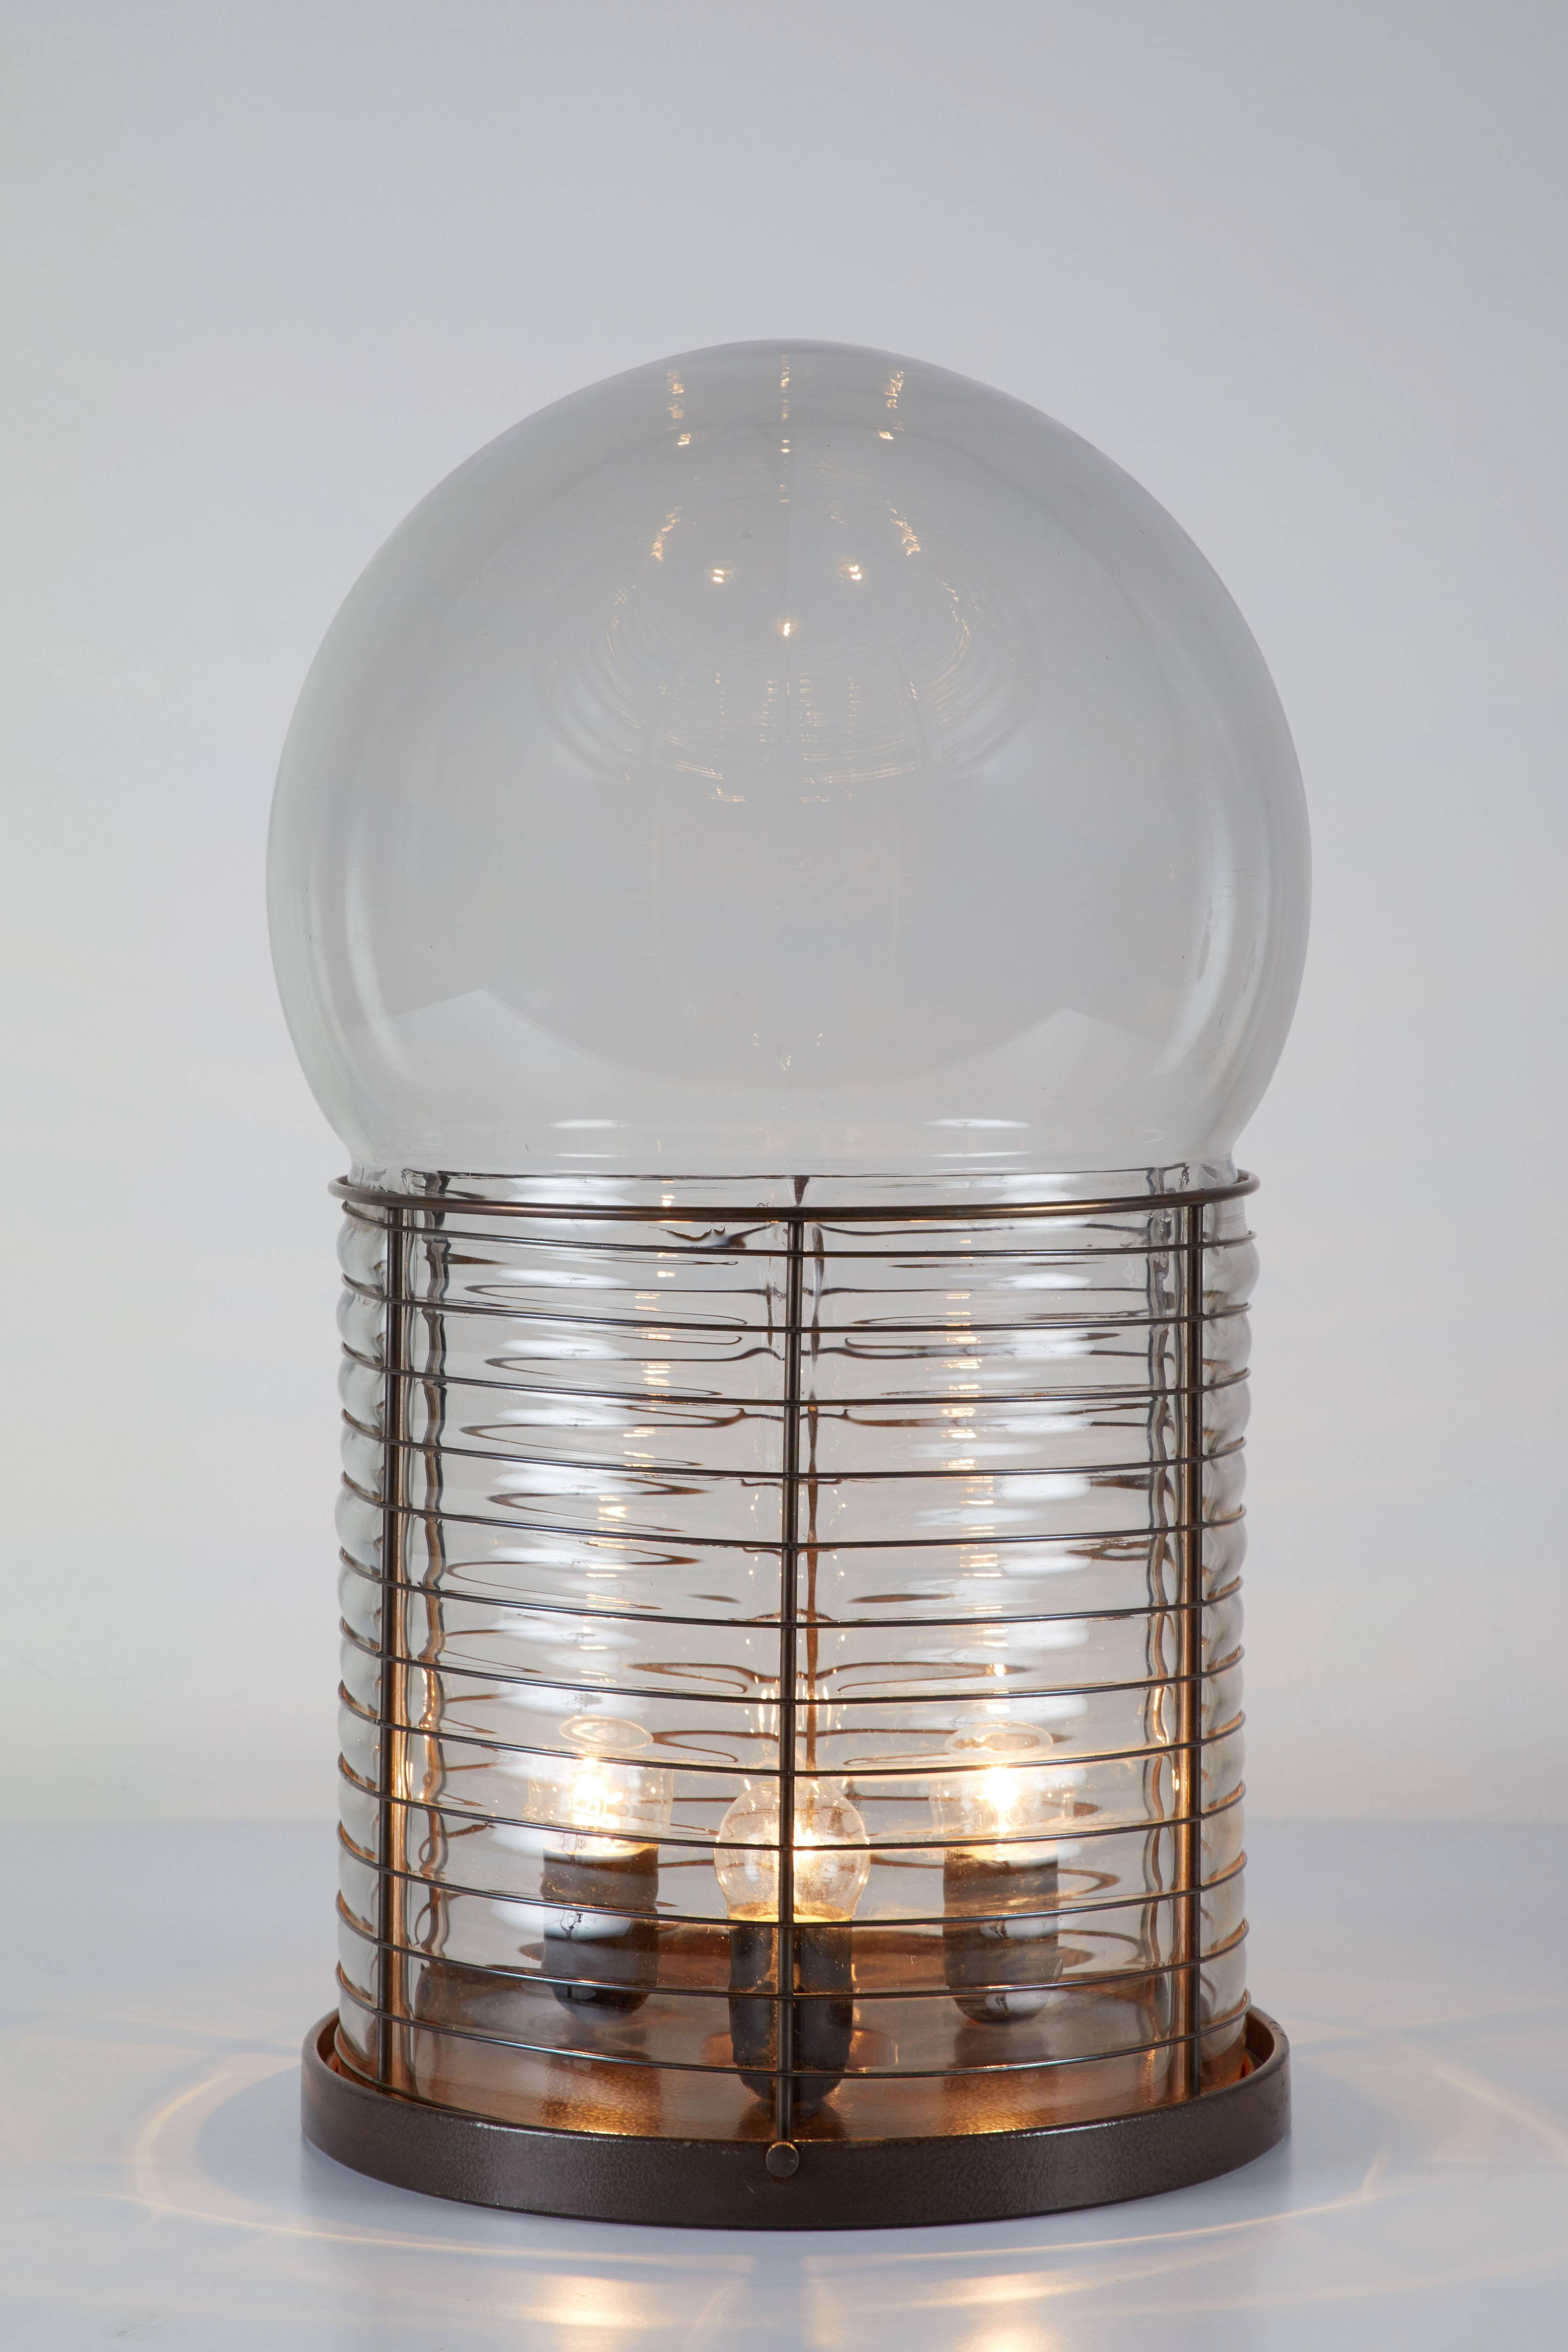 Original vintage table lamp designed by Gae Aulenti for Artemide in Italy, circa 1970. Glass diffuser with iron structure. Original cord. Takes three E27 100w maximum bulbs.